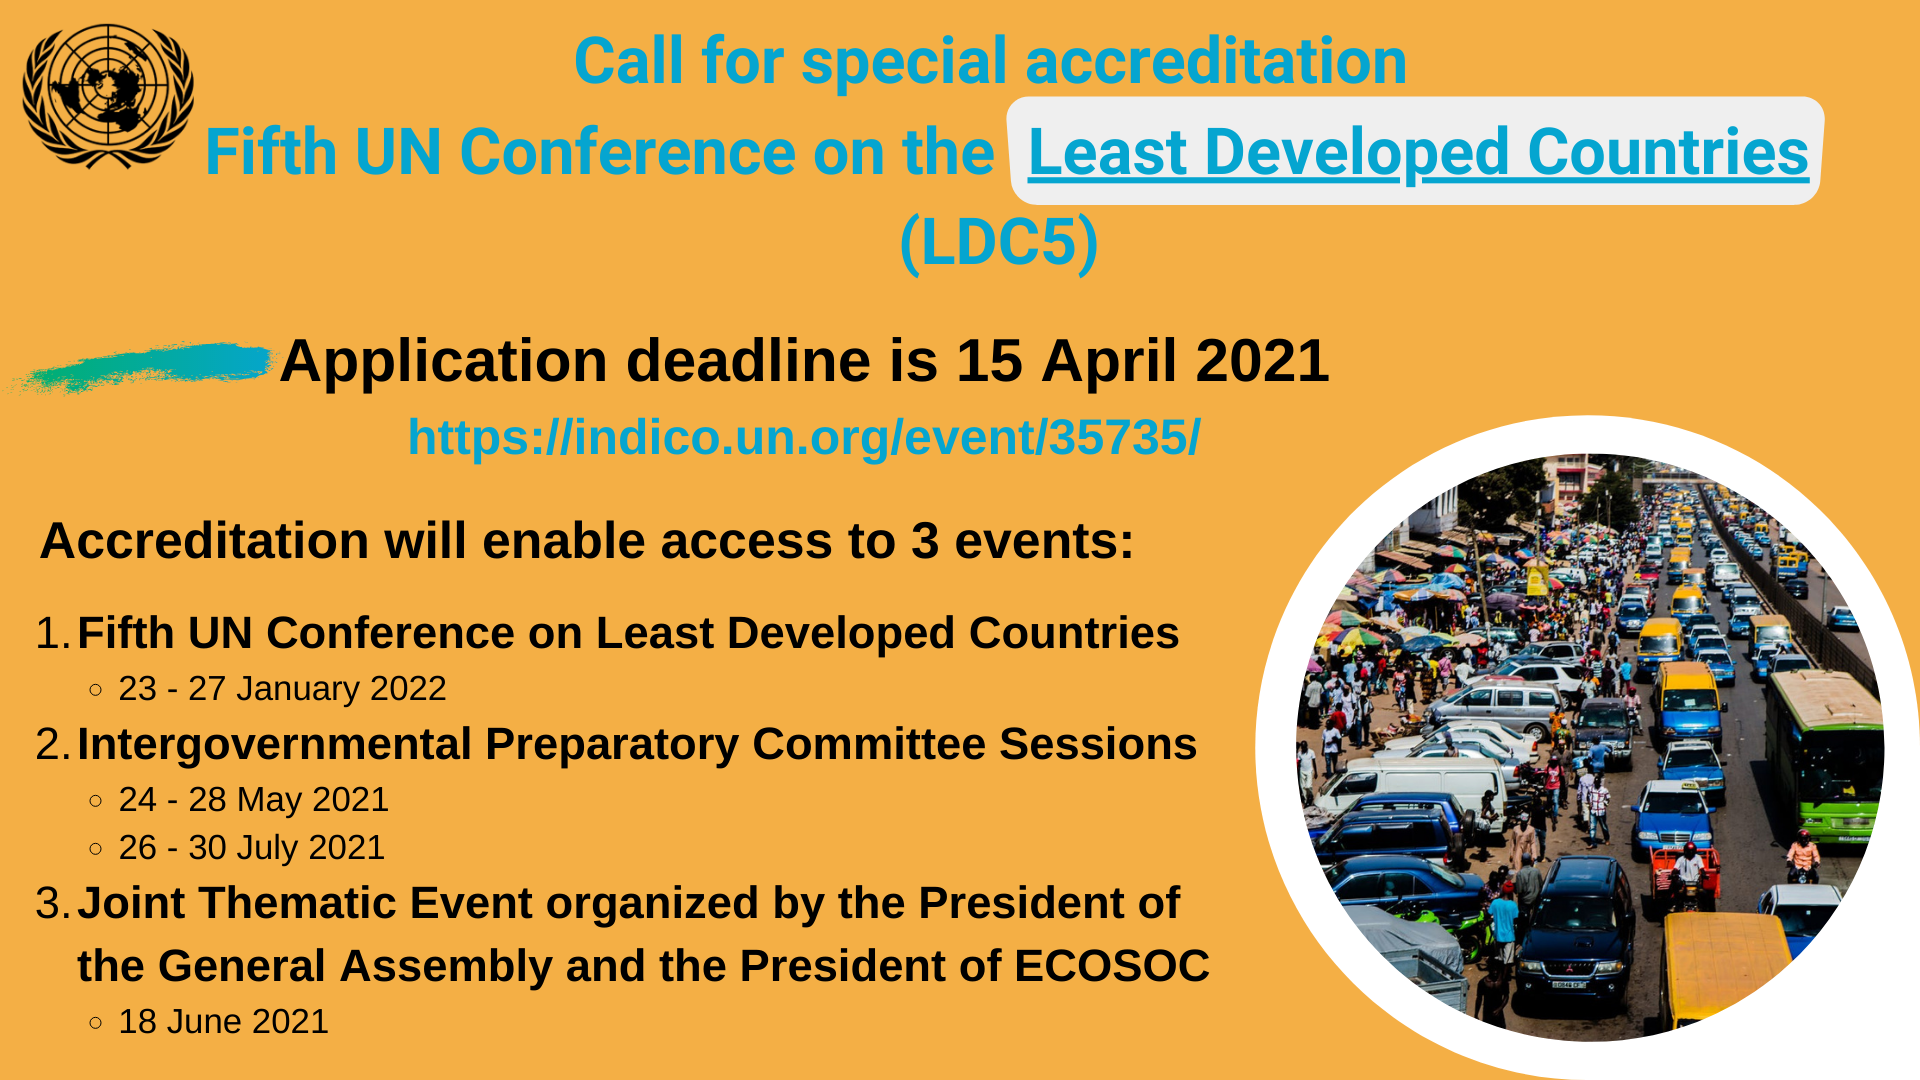 Call for Special accreditation for the Fifth UN Conference on the Least